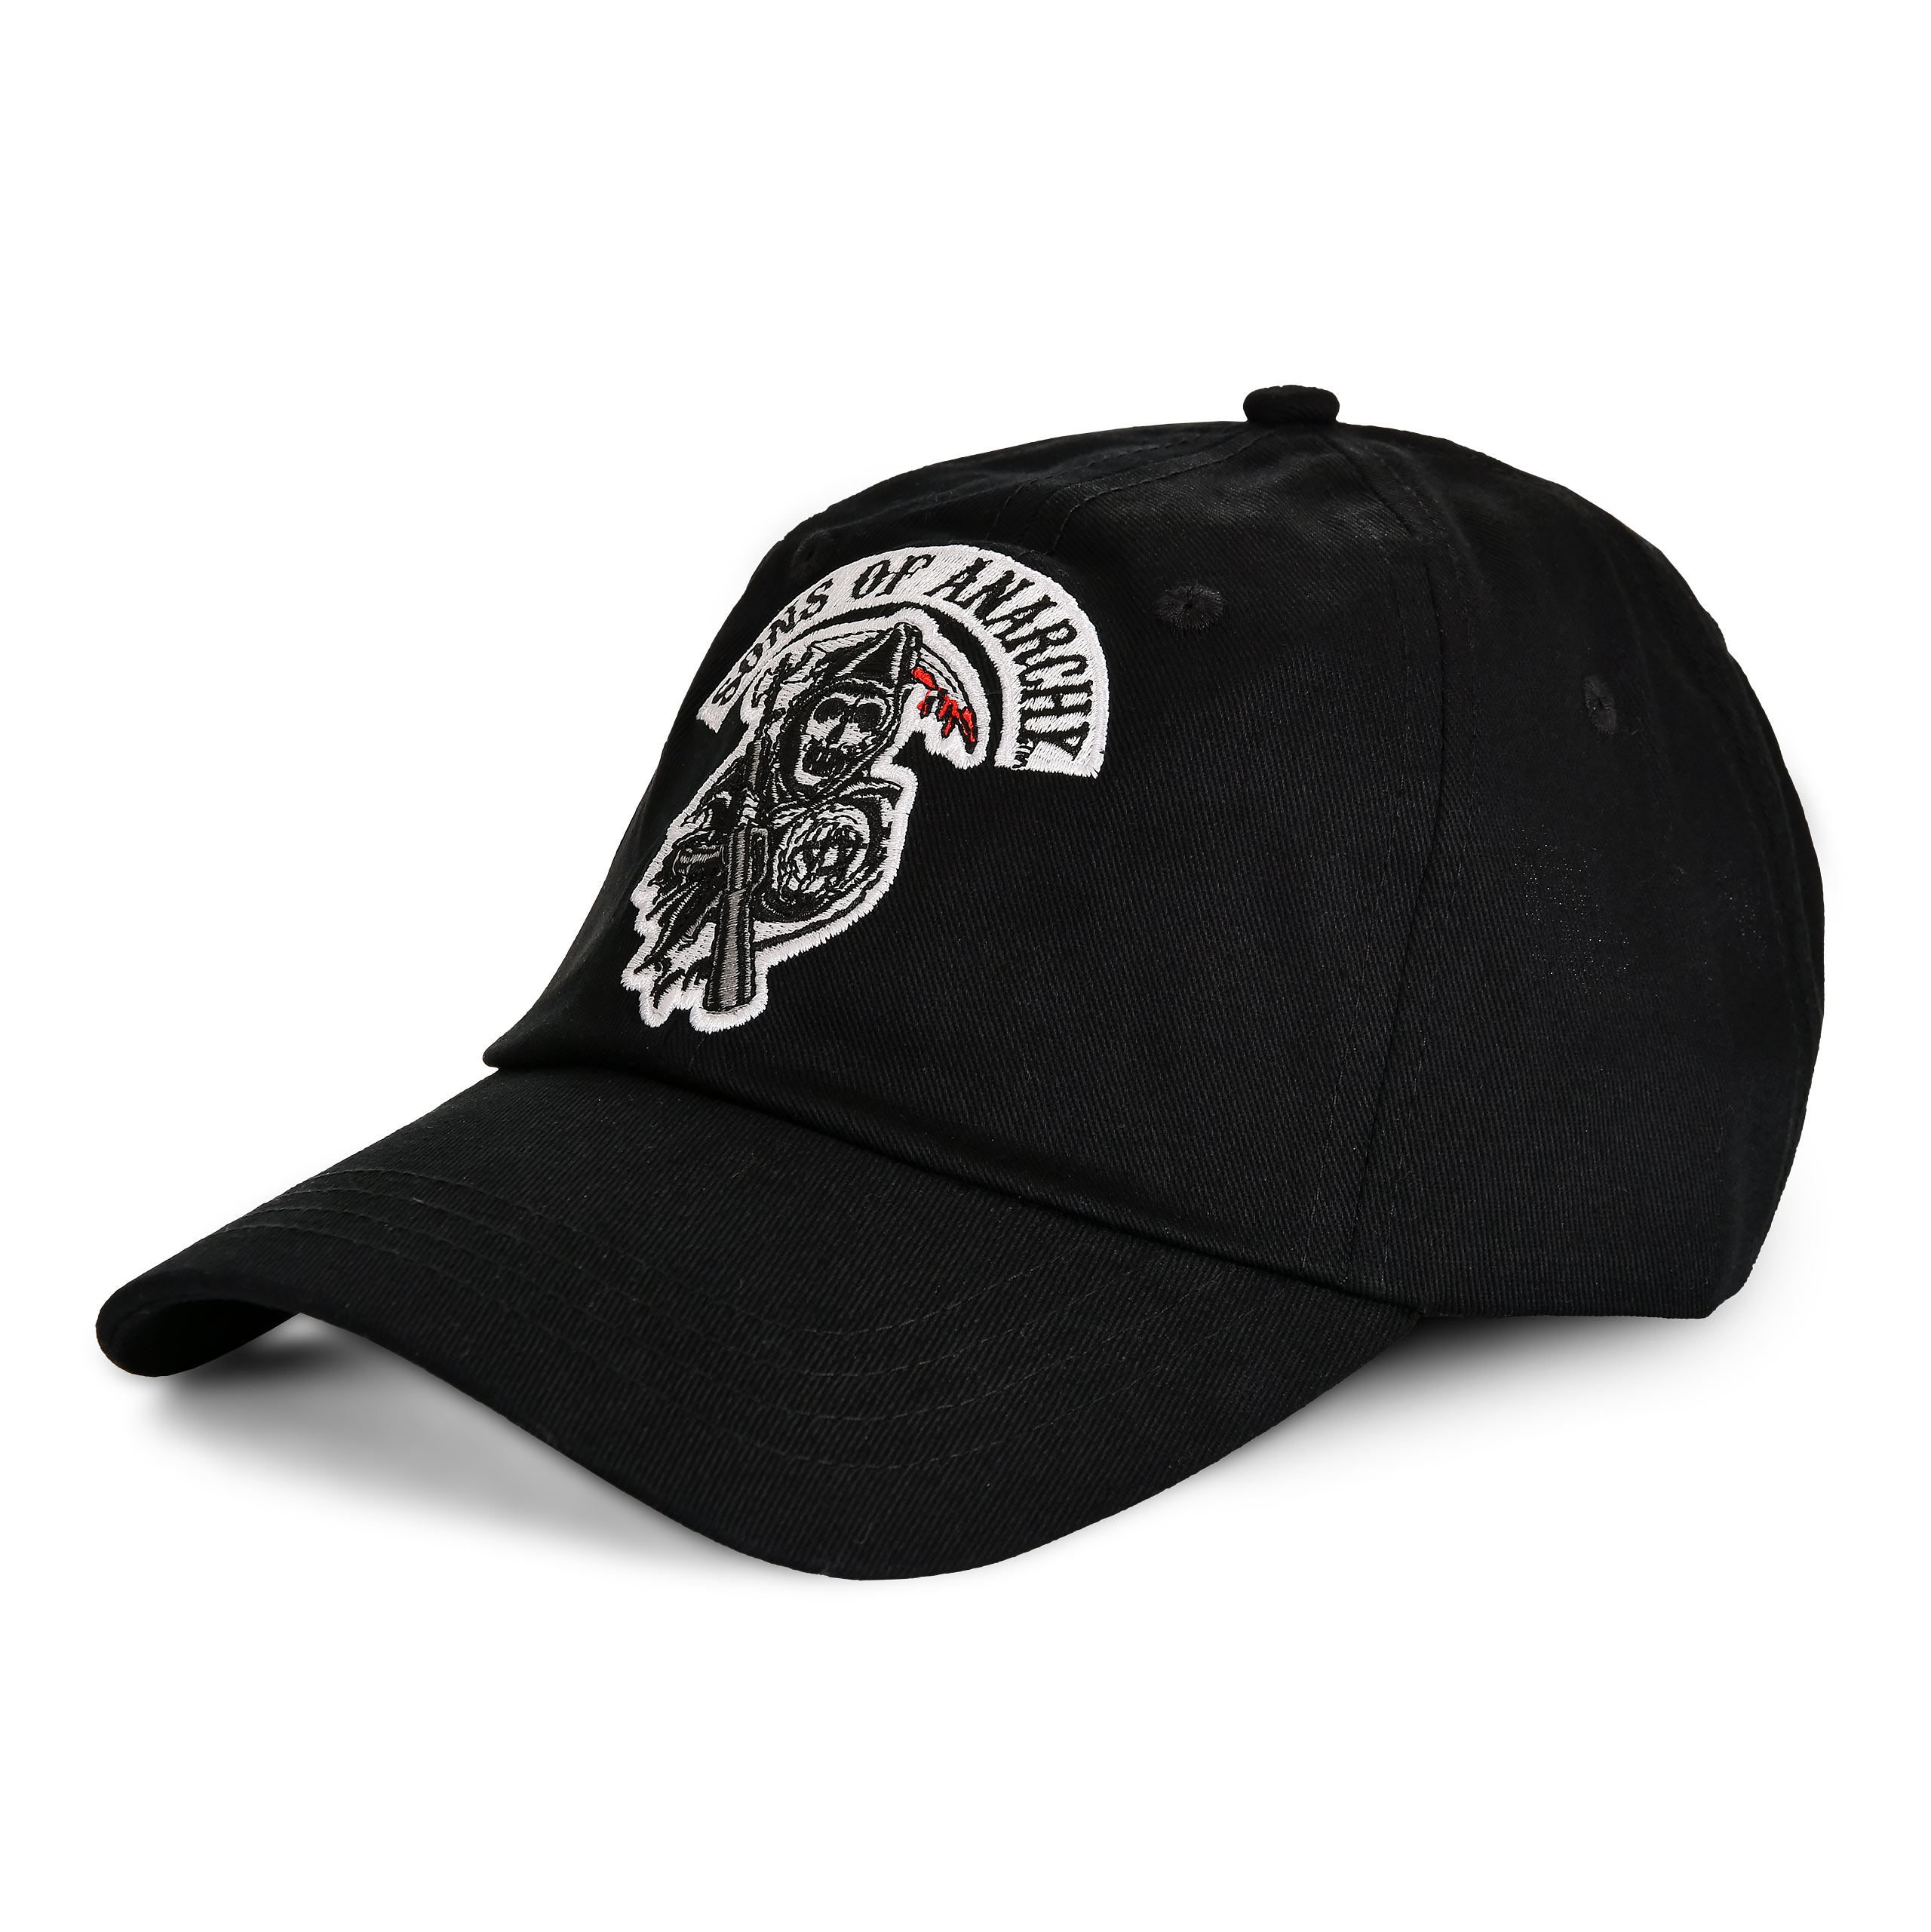 Sons Of Anarchy - Reaper Logo Basecap